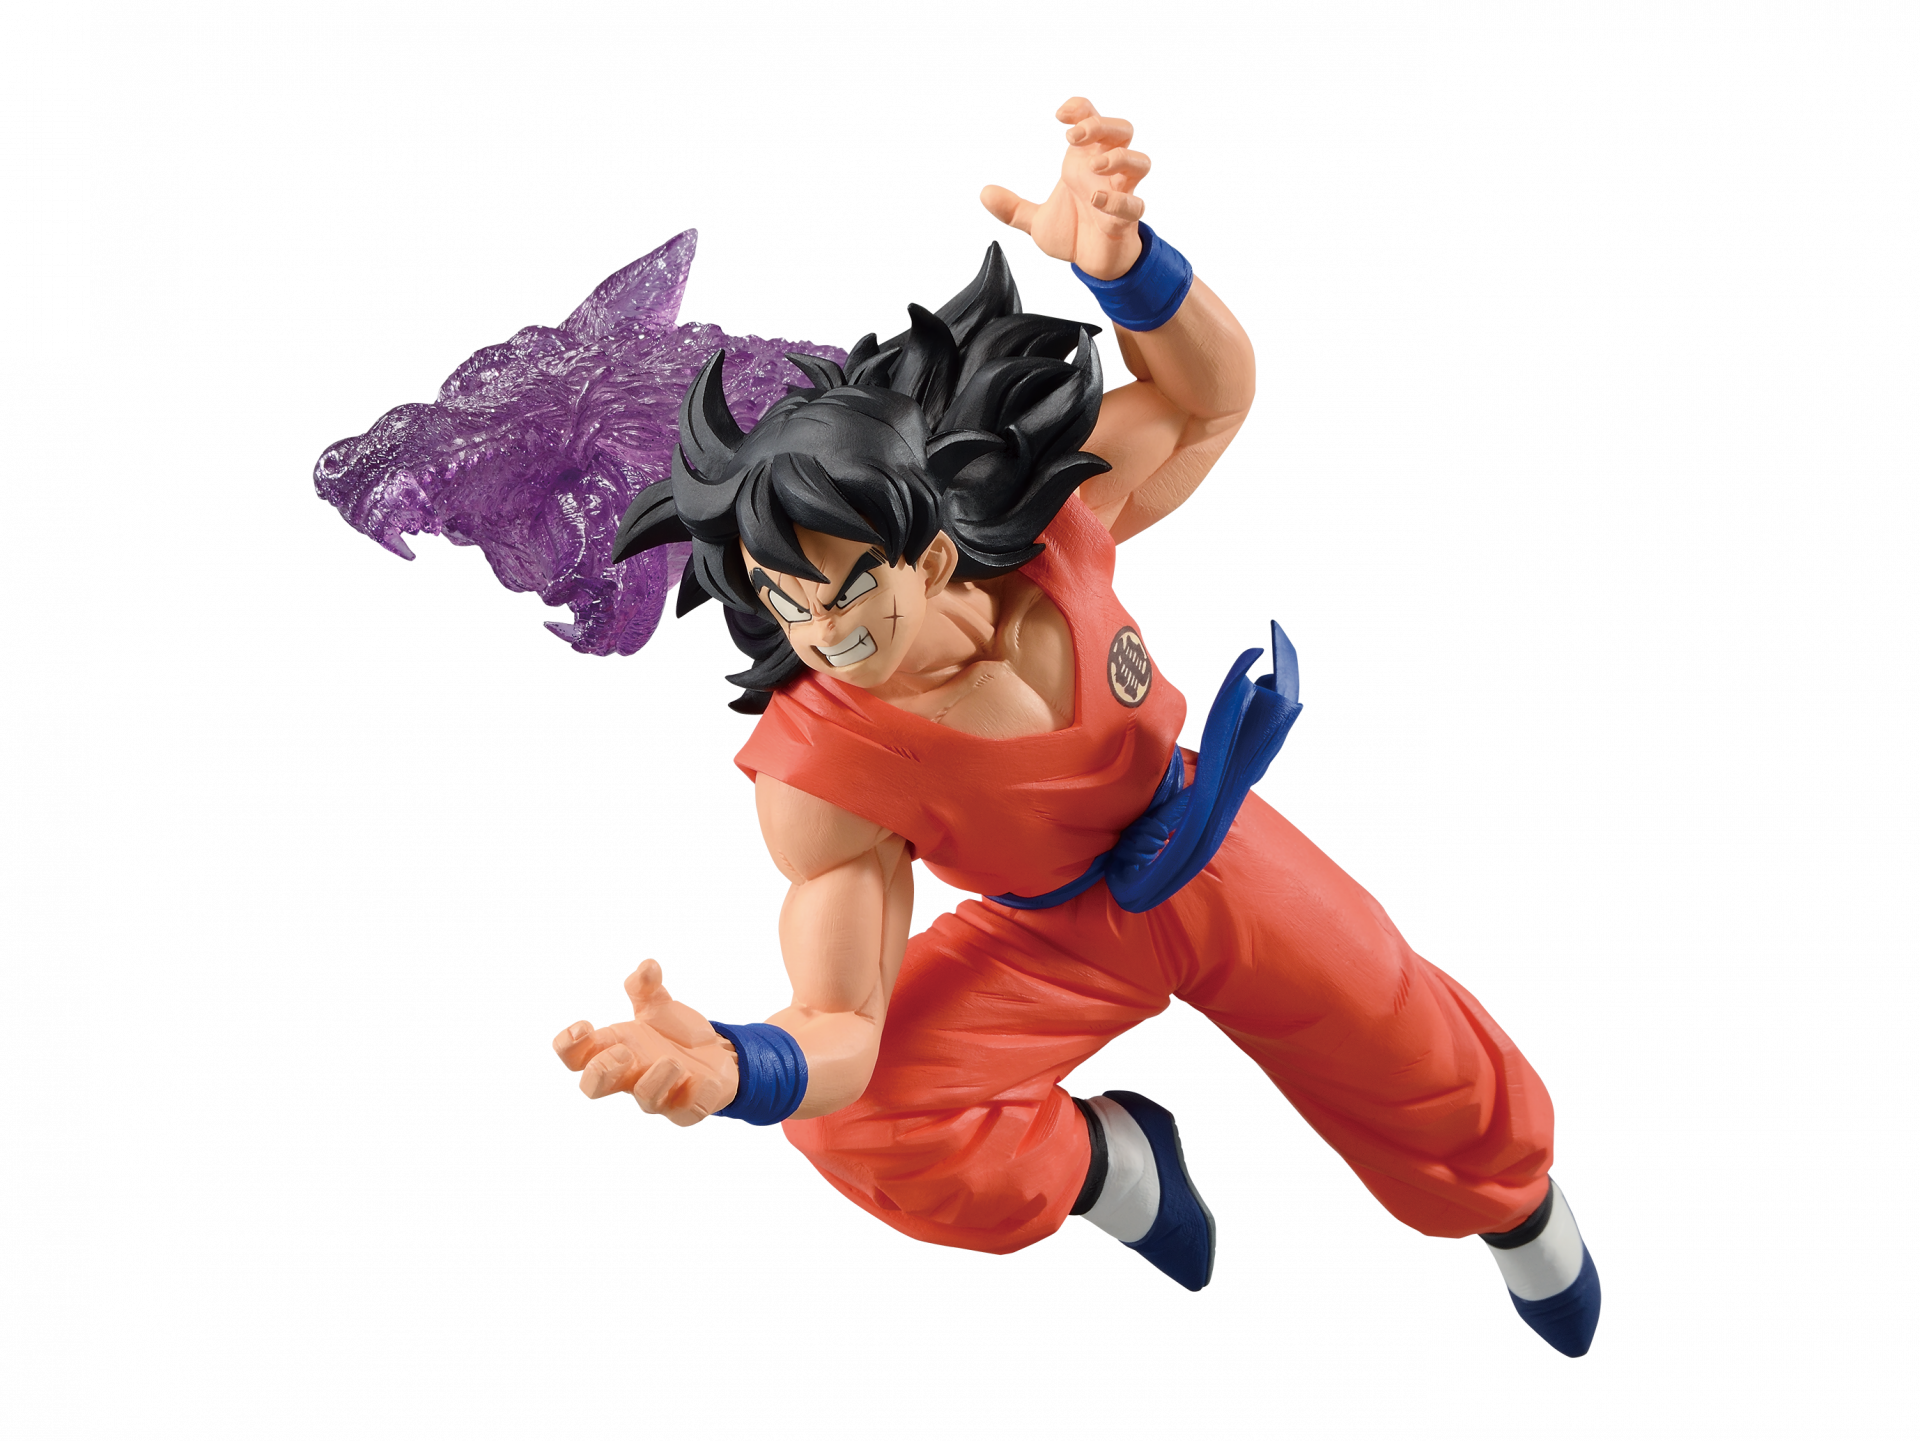 New Addition to G×materia! Yamcha Is Here as a Game Center Prize!